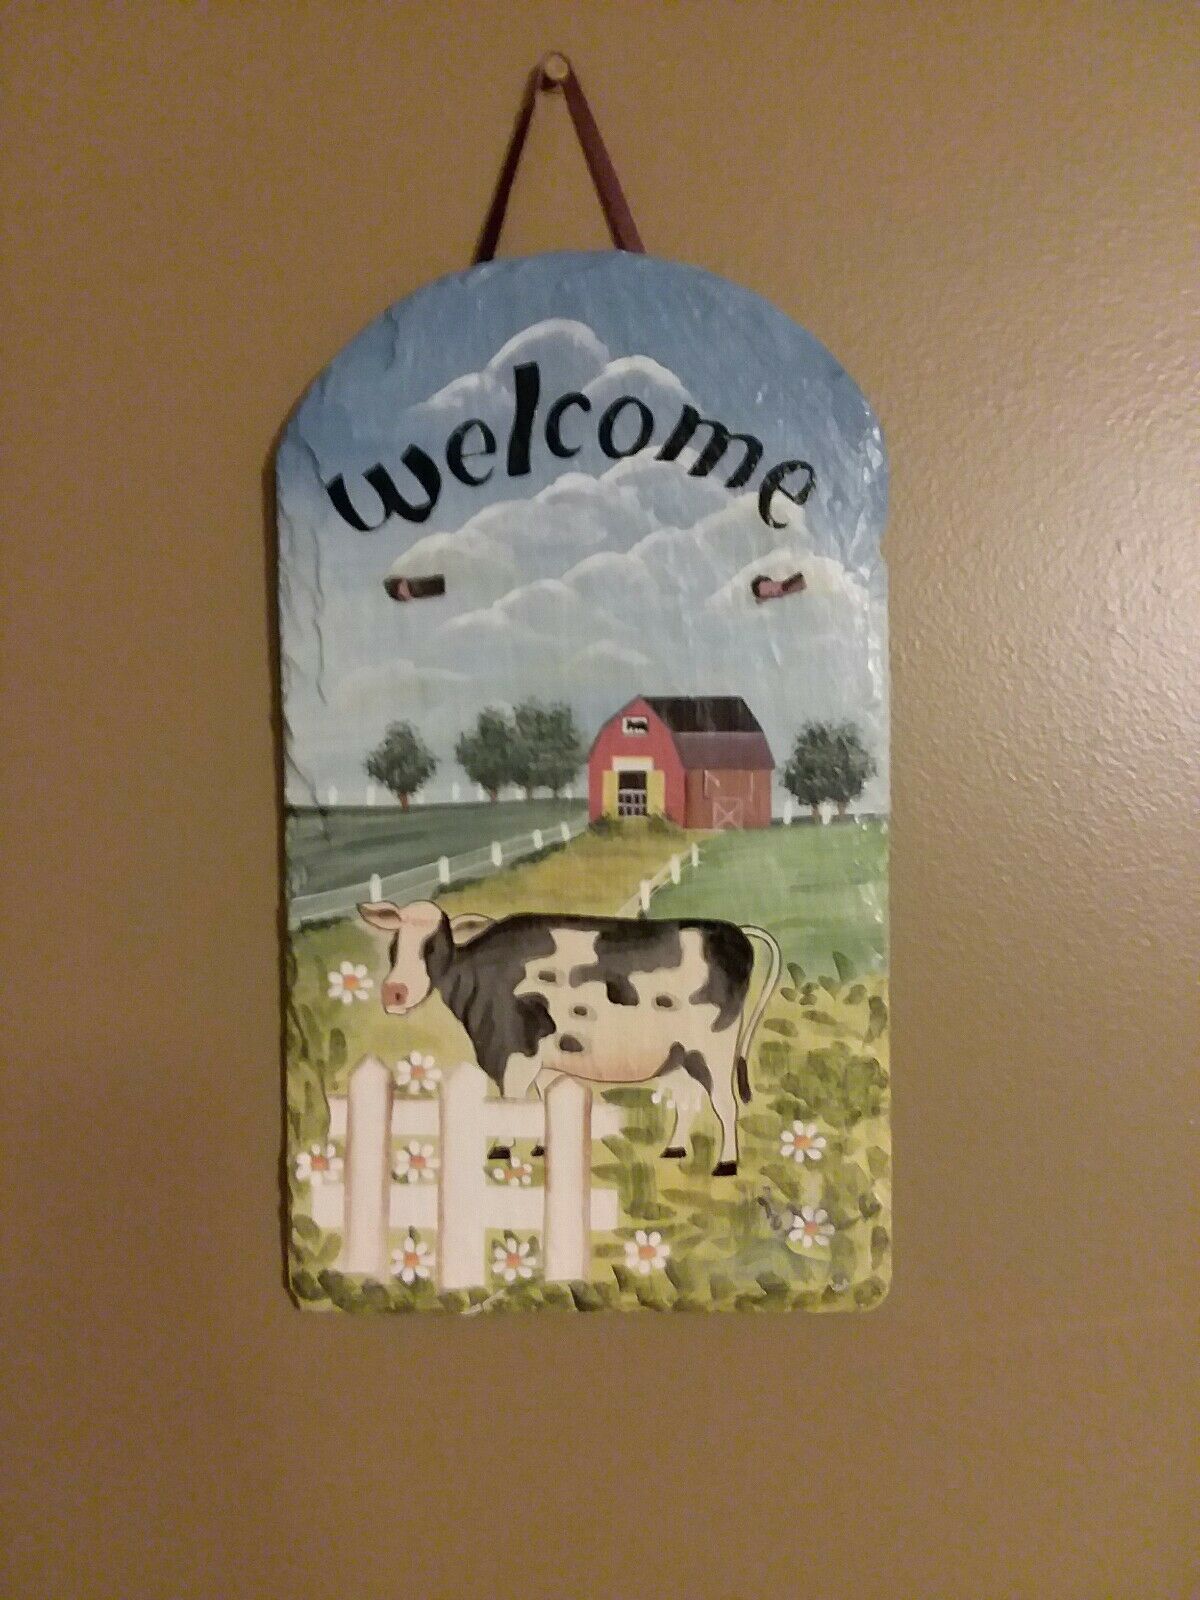 Flagstone Look-a-like Cow/farm "welcome" Sign Hand Painted